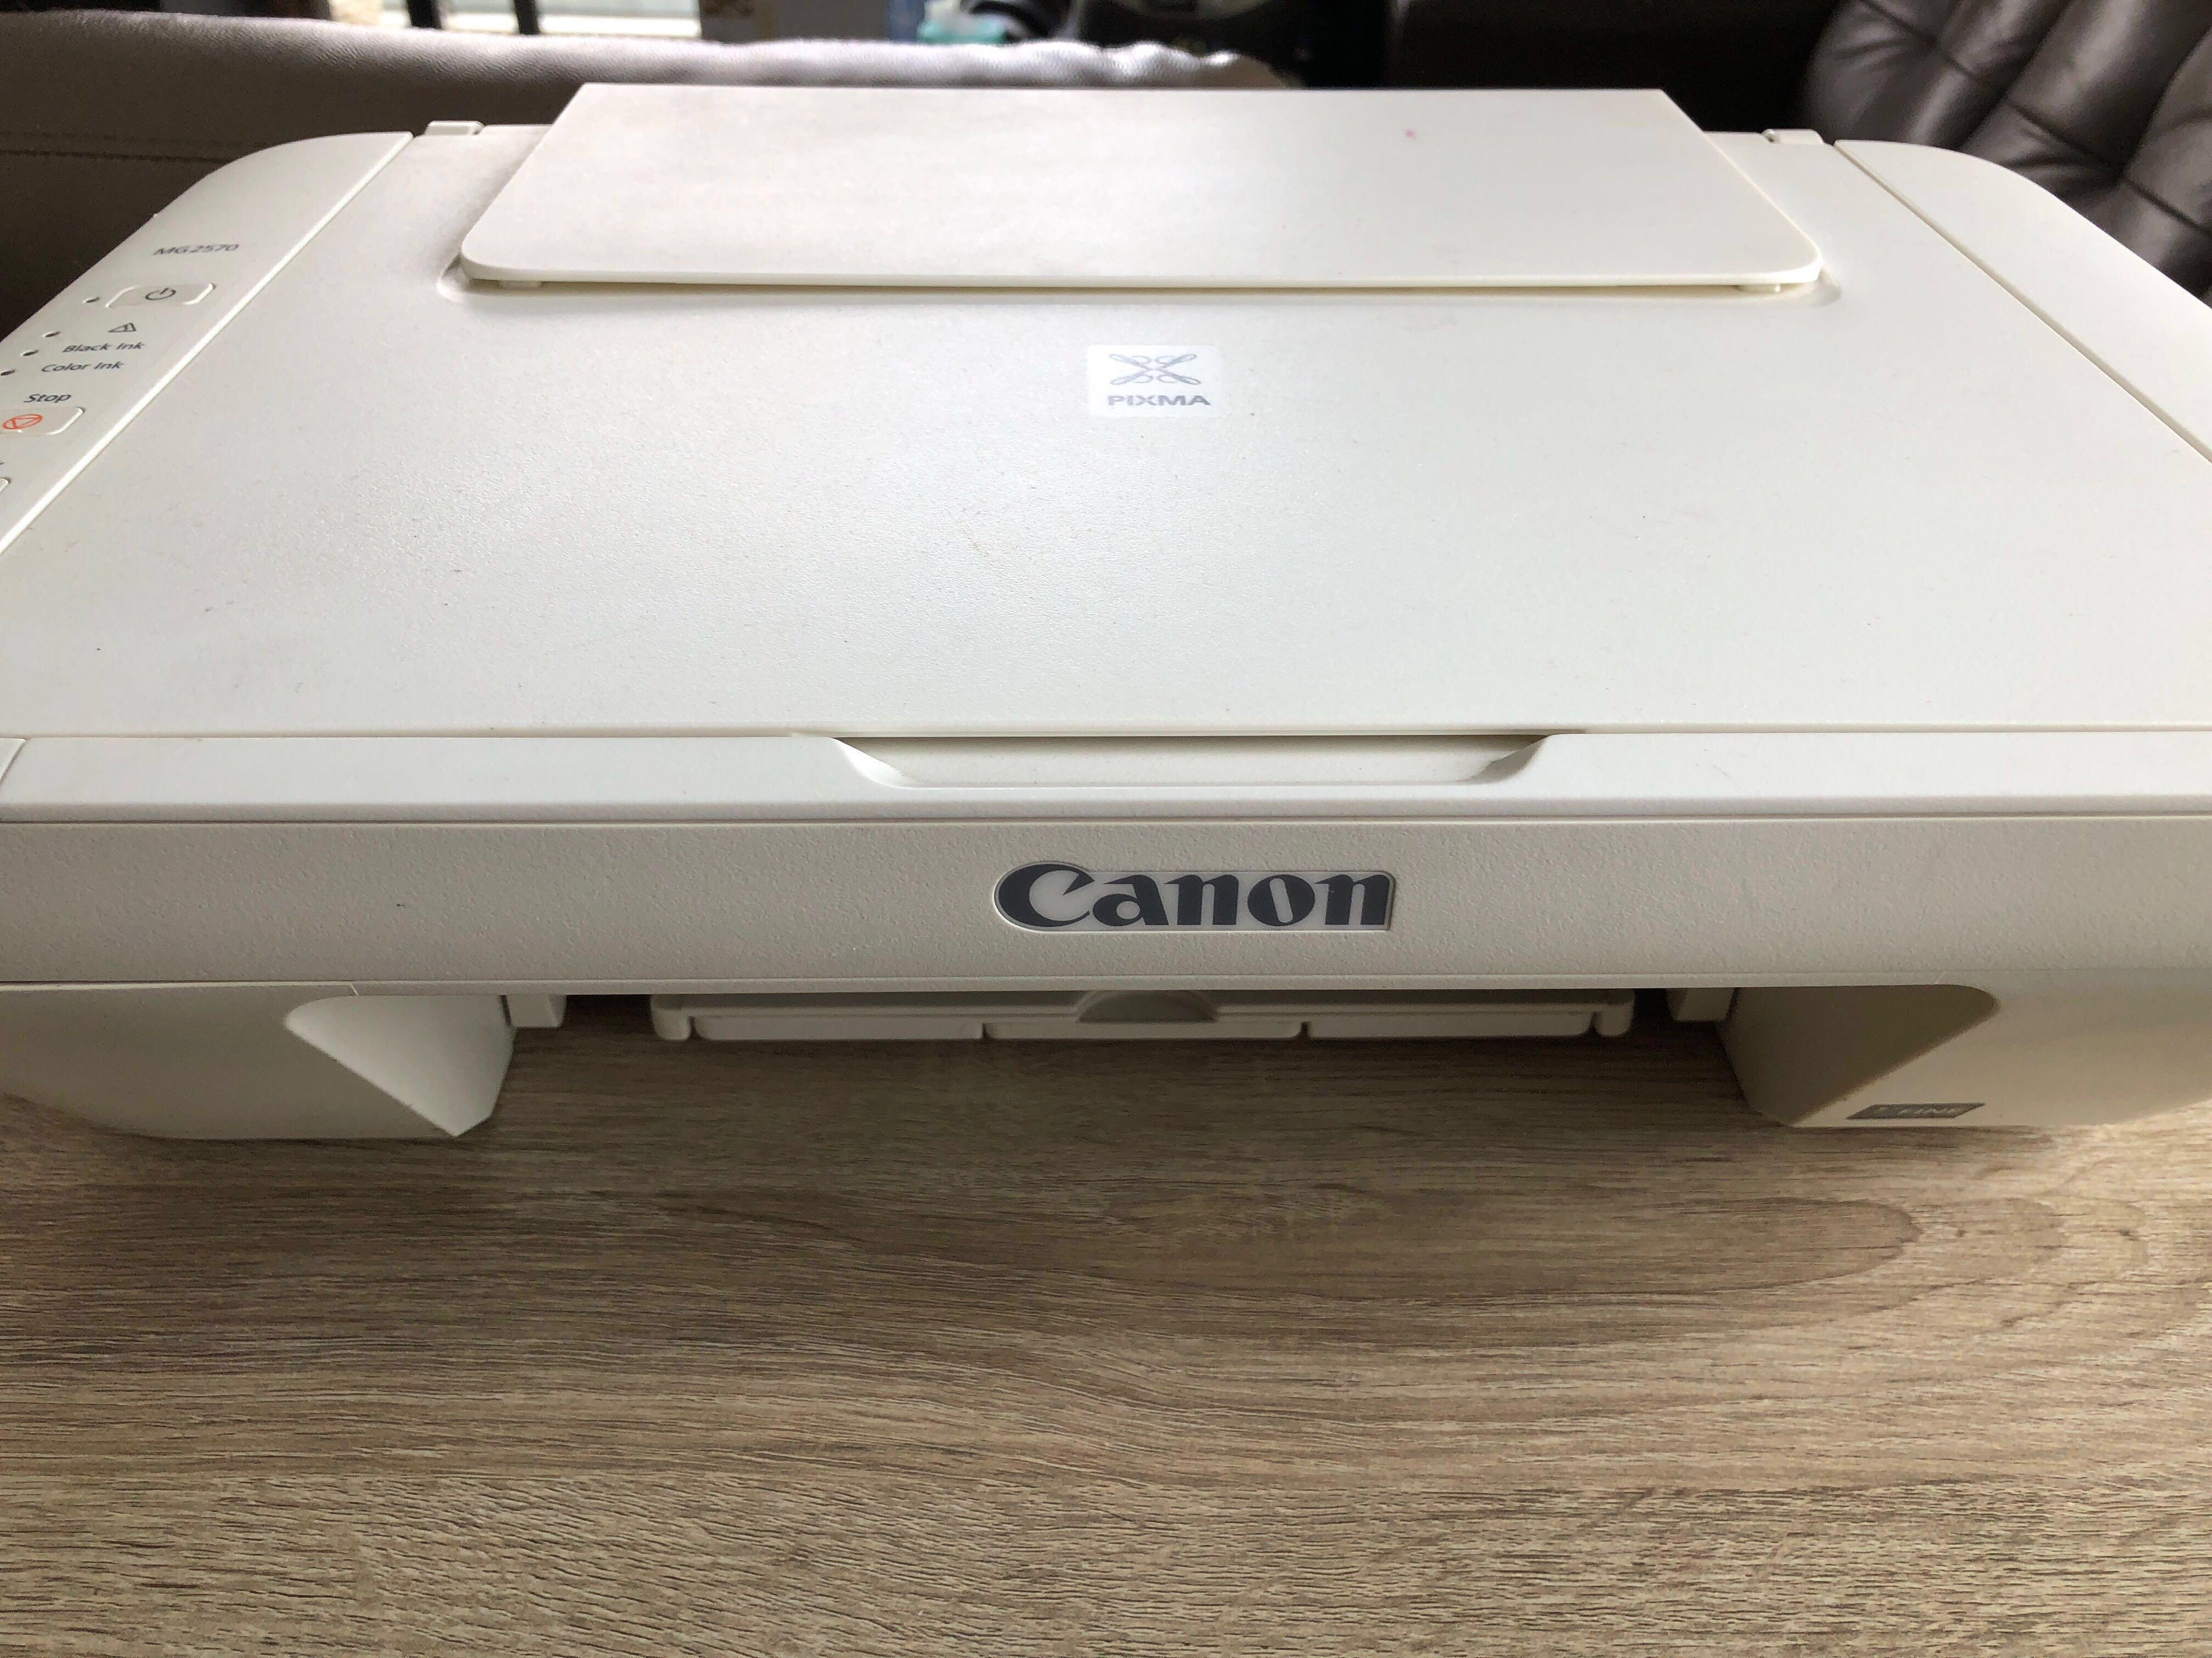 Canon Pixma Mg2500 Printer Scanner Computers Tech Printers Scanners Copiers On Carousell